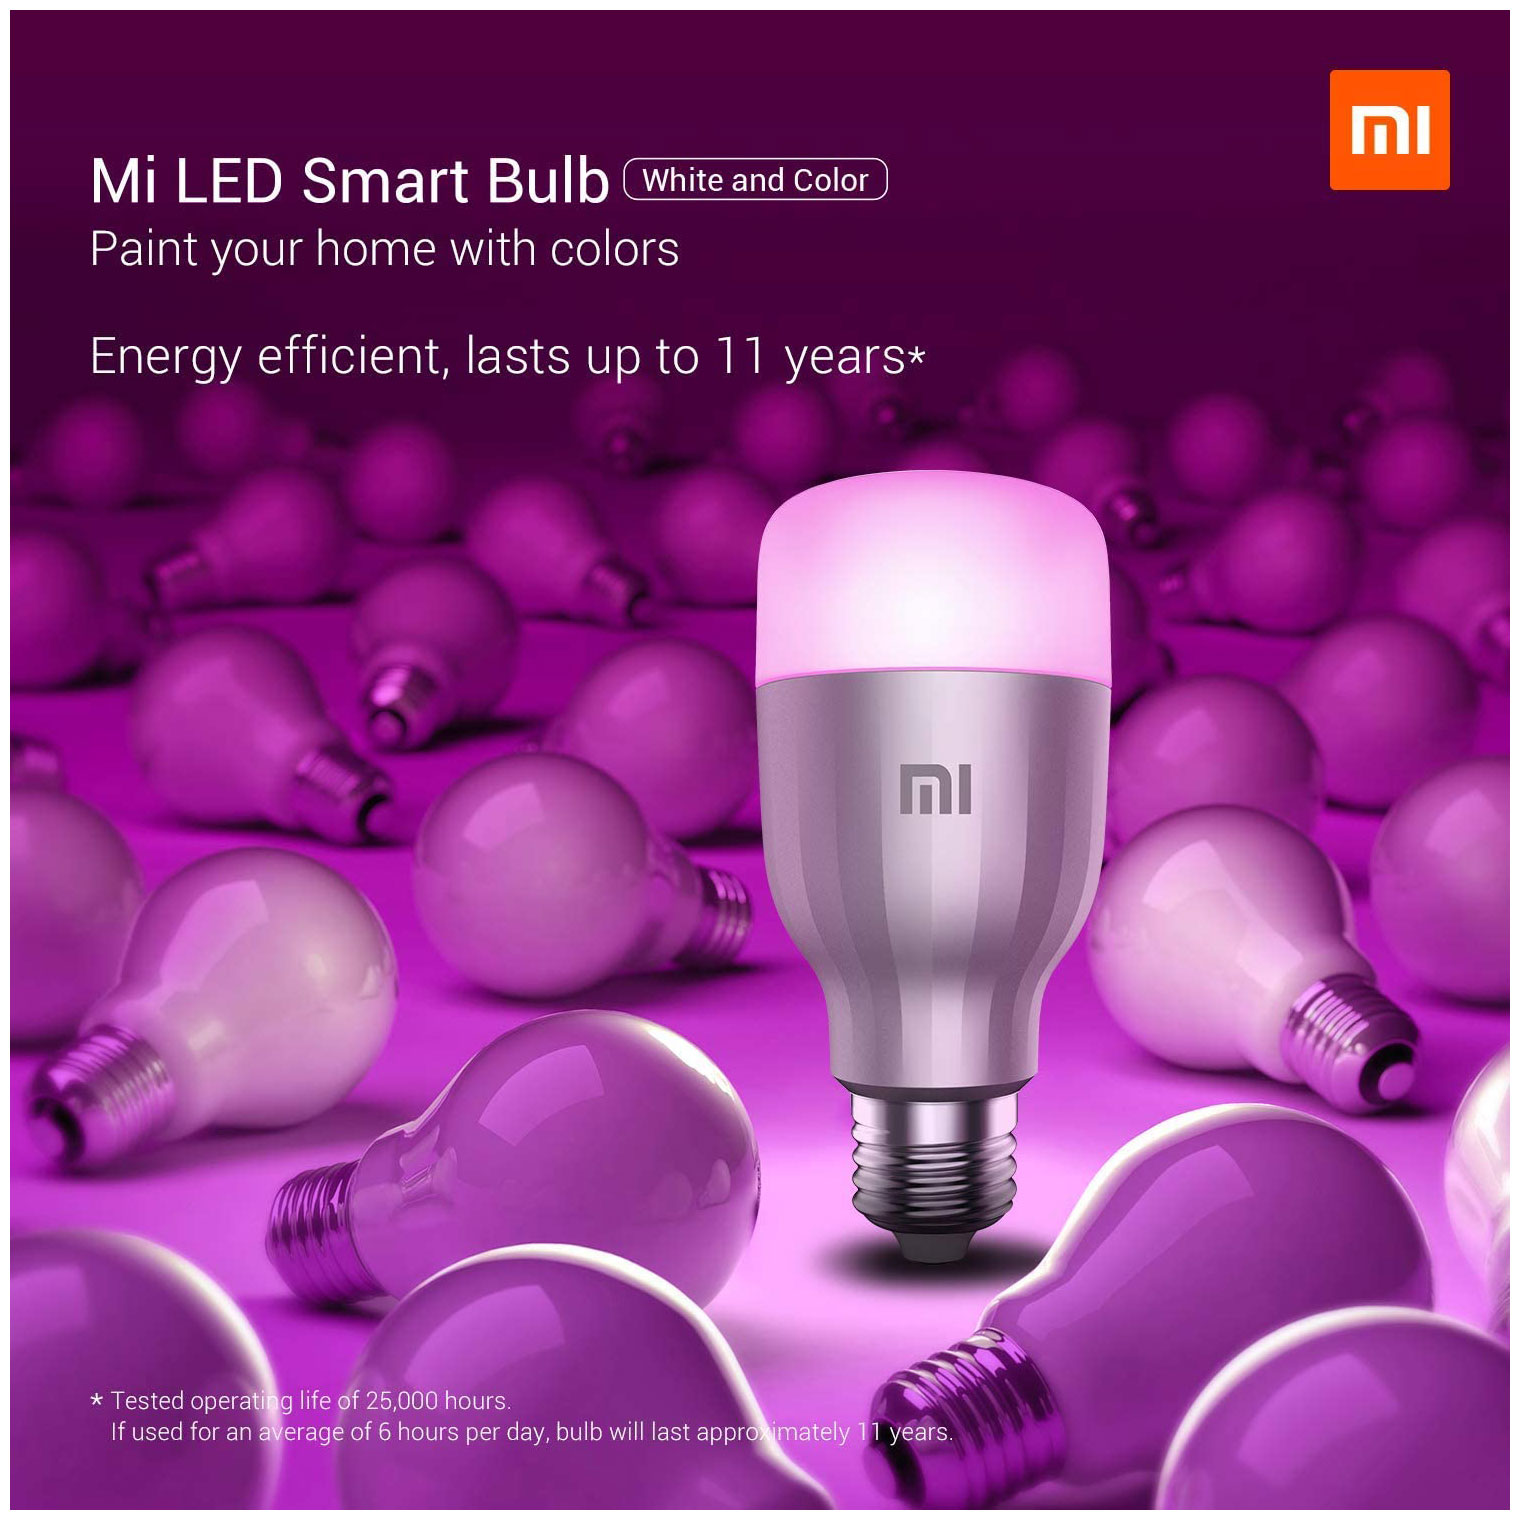 Wi-Fi лампа Xiaomi Mi Smart LED Bulb Essential MJDPL01YL (White and Color) E27 (GPX4021GL) aubess smart light bulb rgbcw color changing led light e27 smart life app compatible alexa google home 9w work with gateway